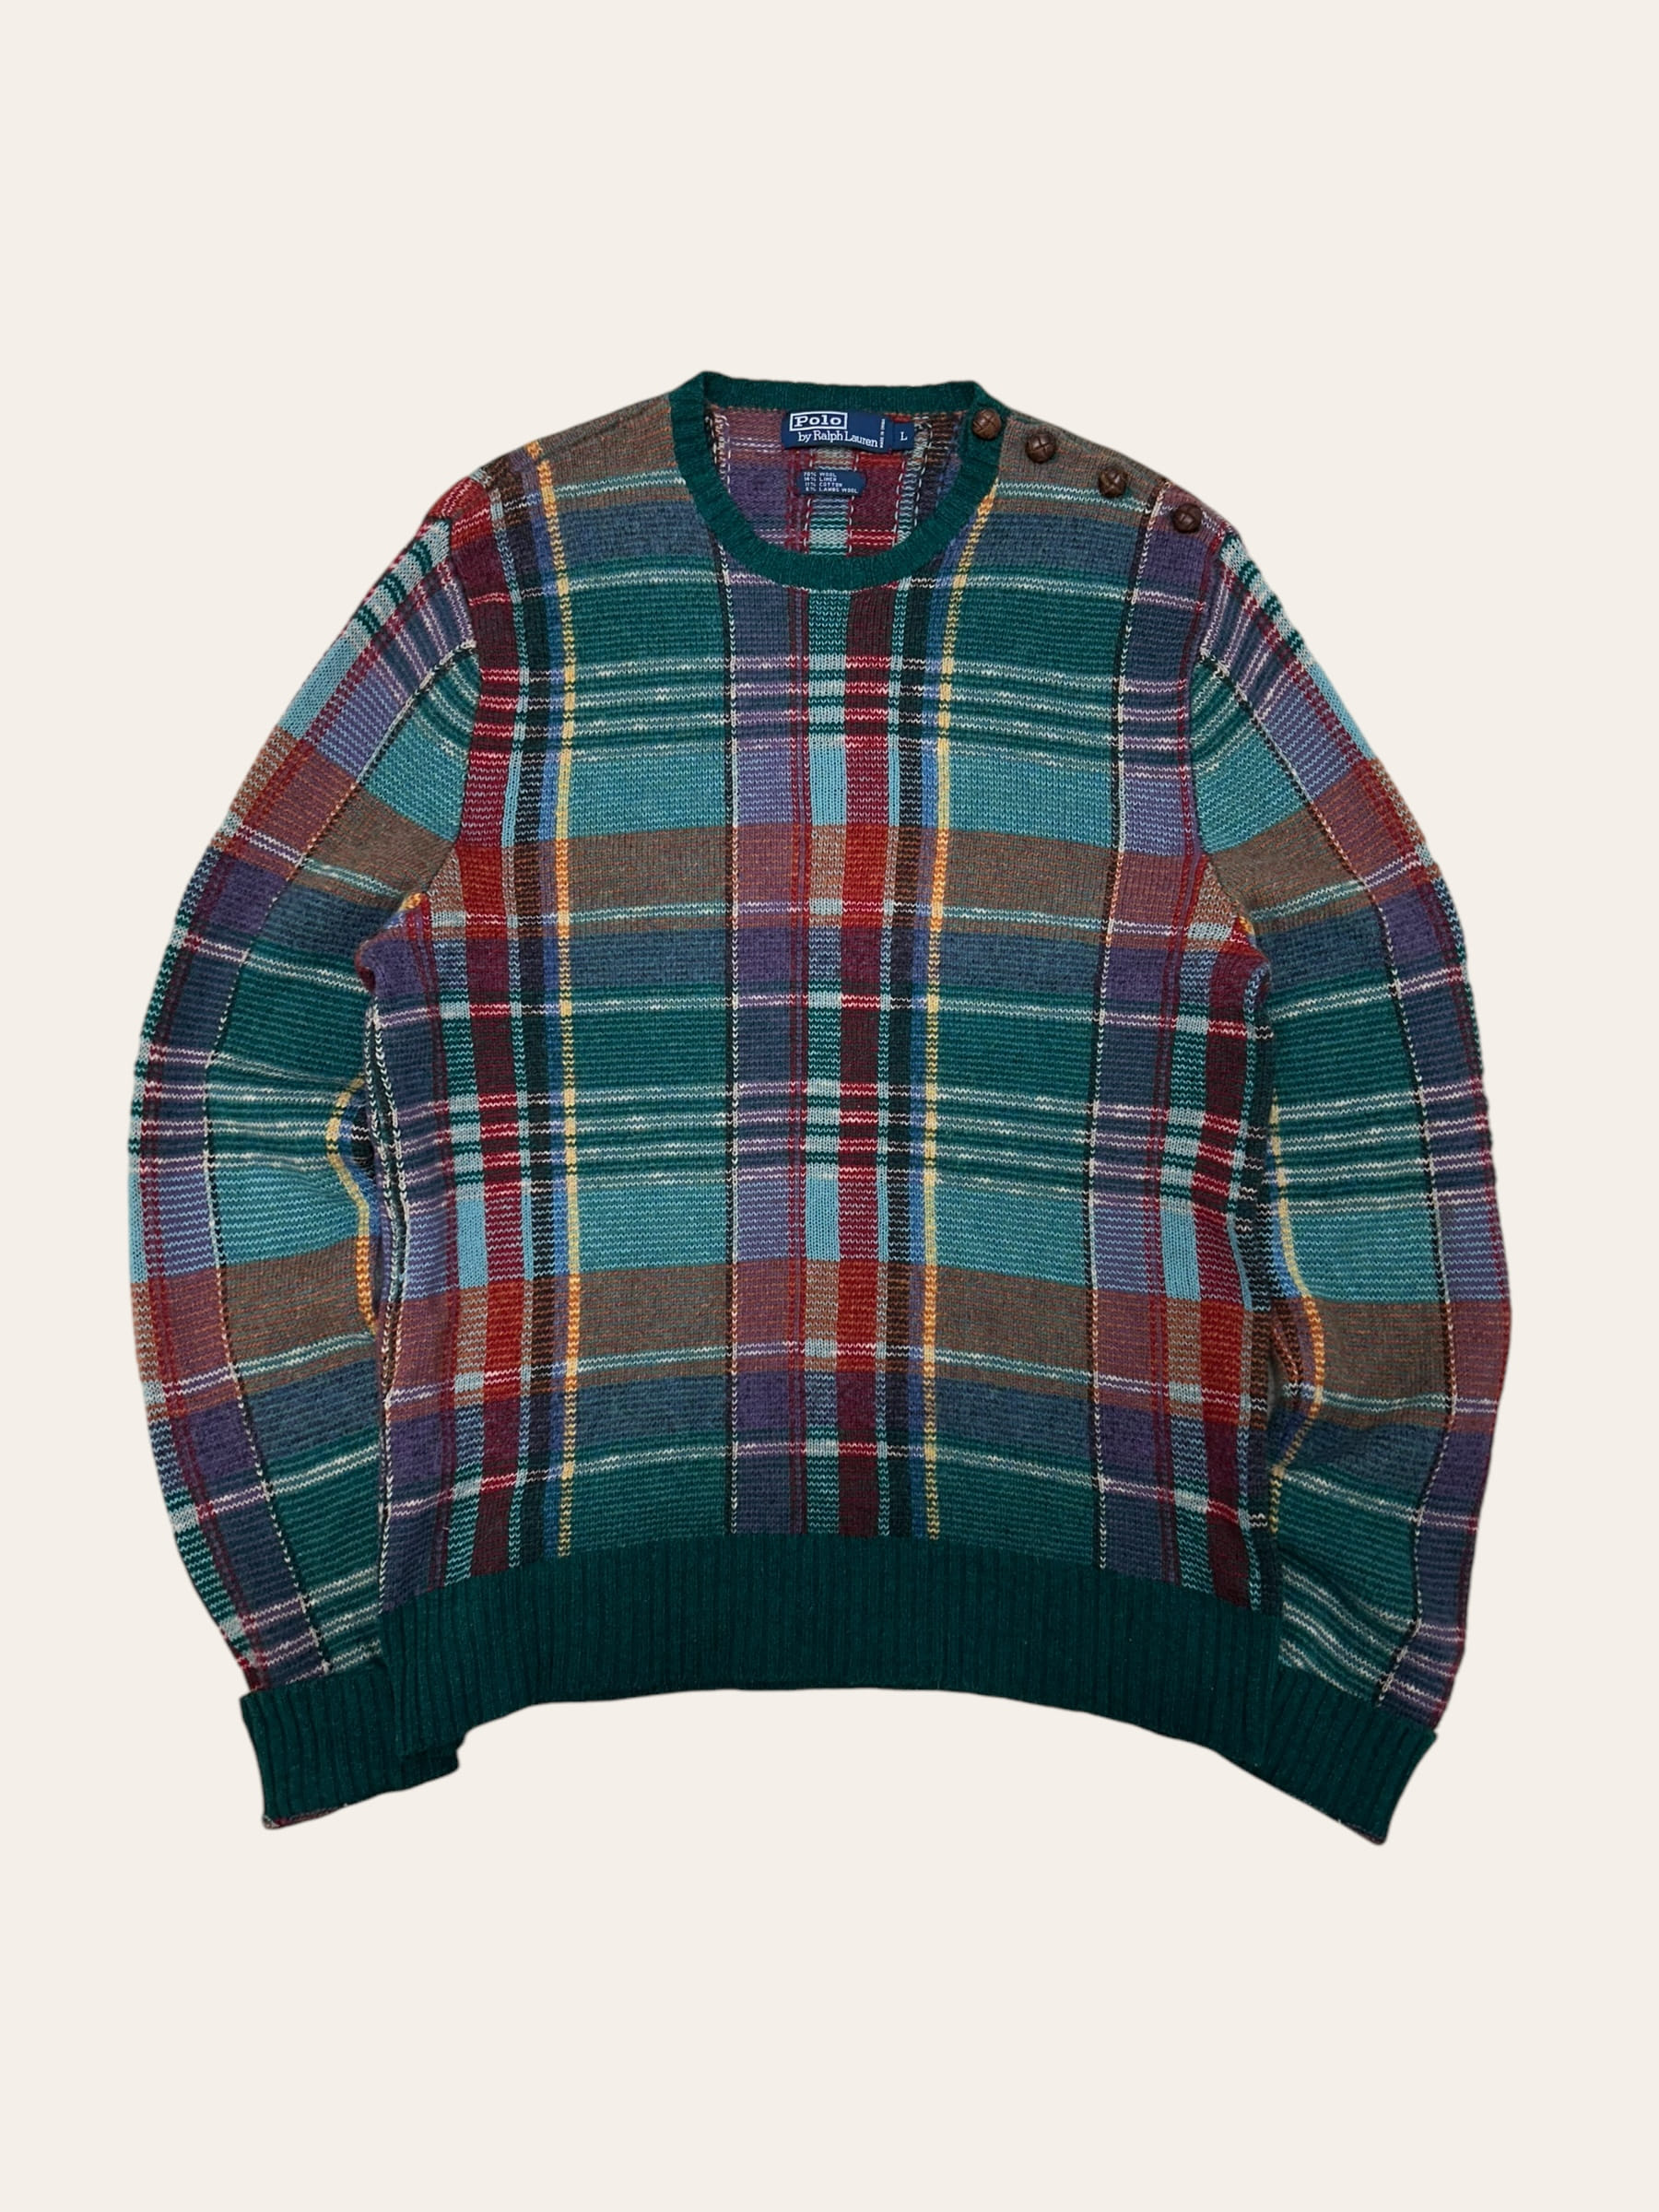 Polo ralph lauren mulricolor madras check lambswool sweater L